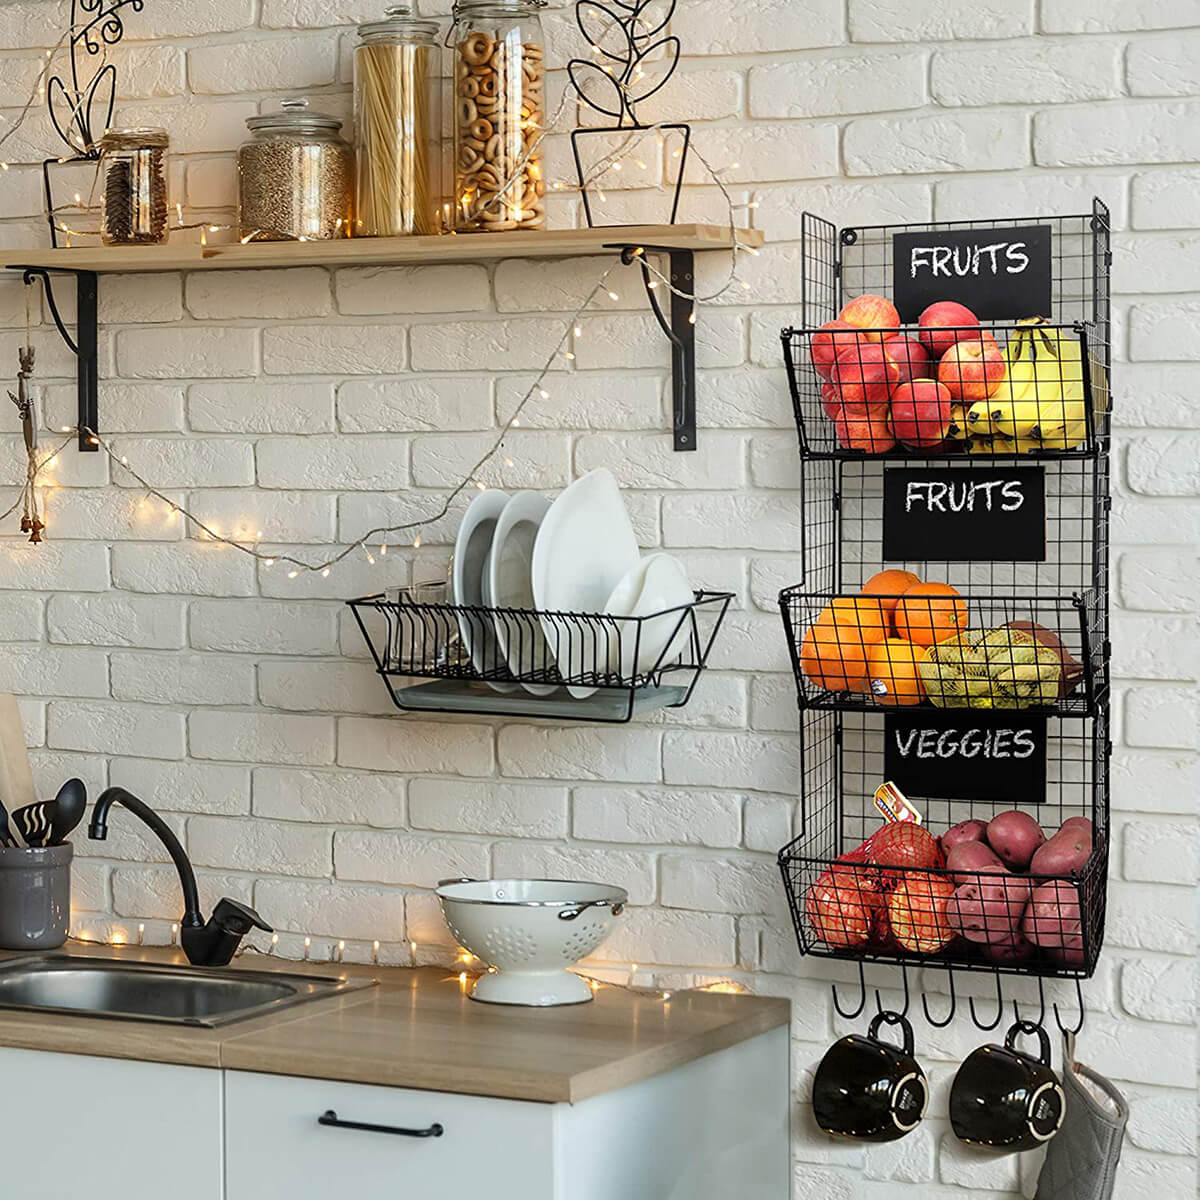 Top 5 Small Kitchen Organization Hacks For More Space